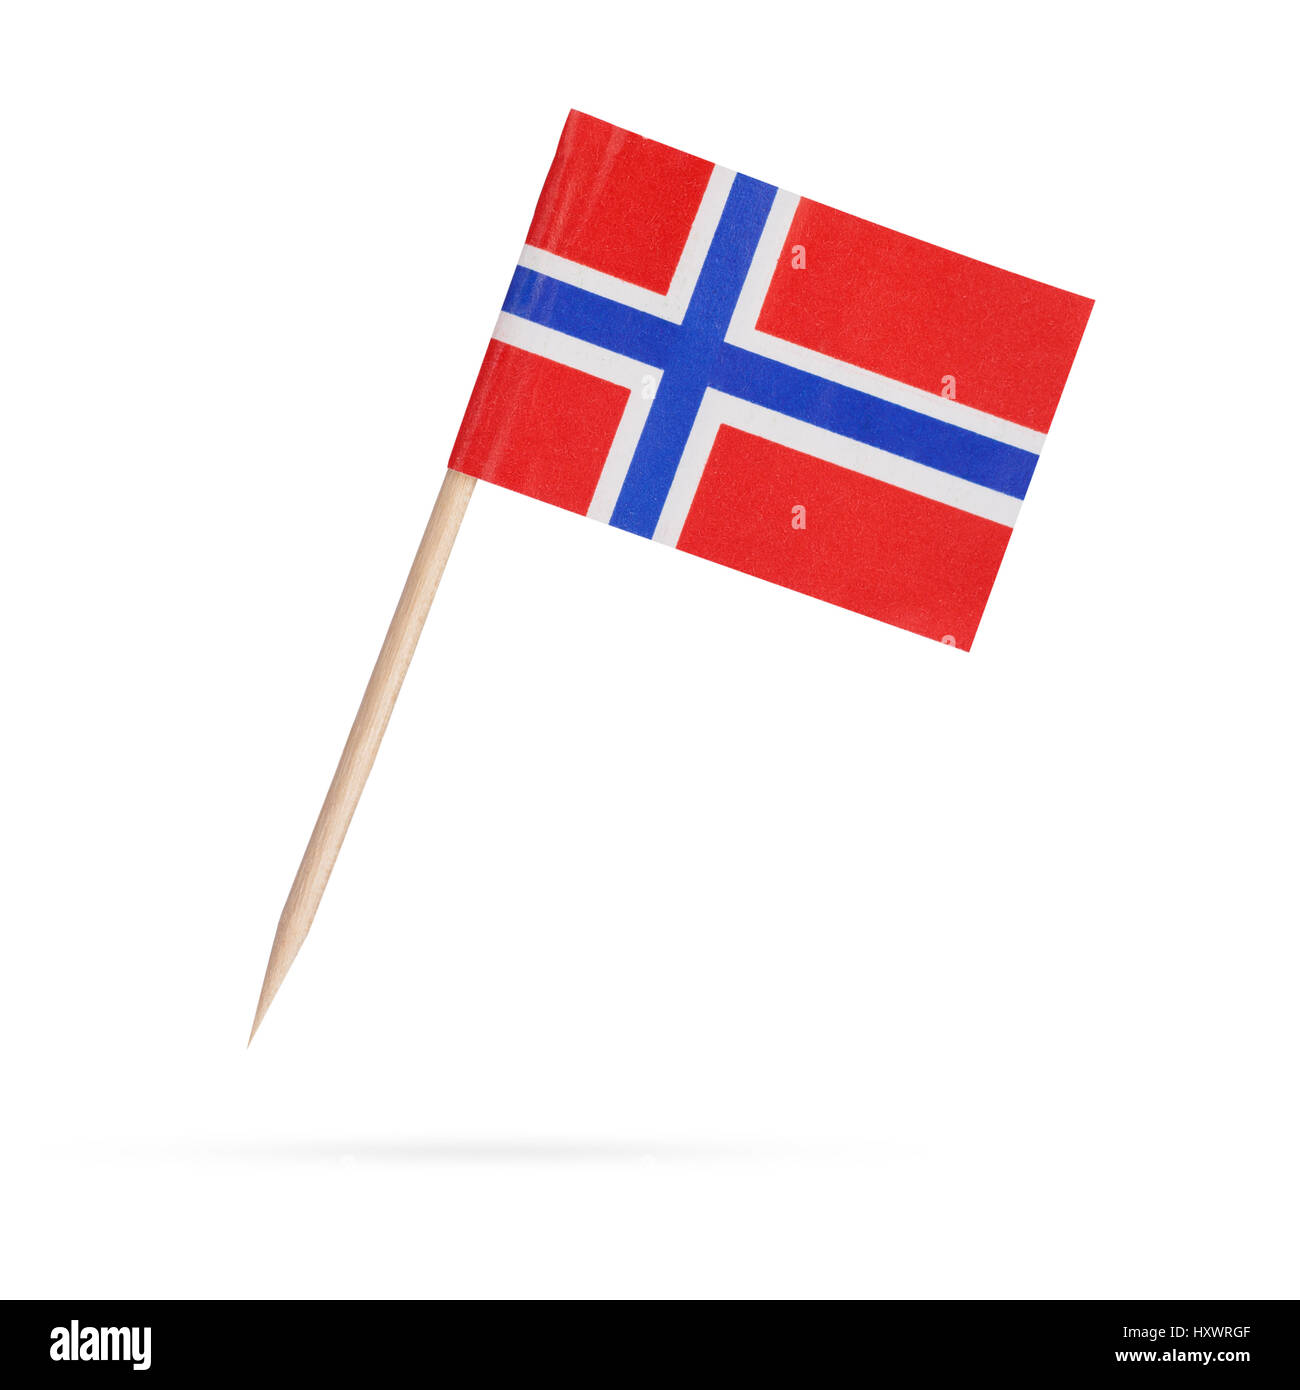 Miniature paper flag Norway. Norwegian flag Isolated on white background.With shadow below Stock Photo